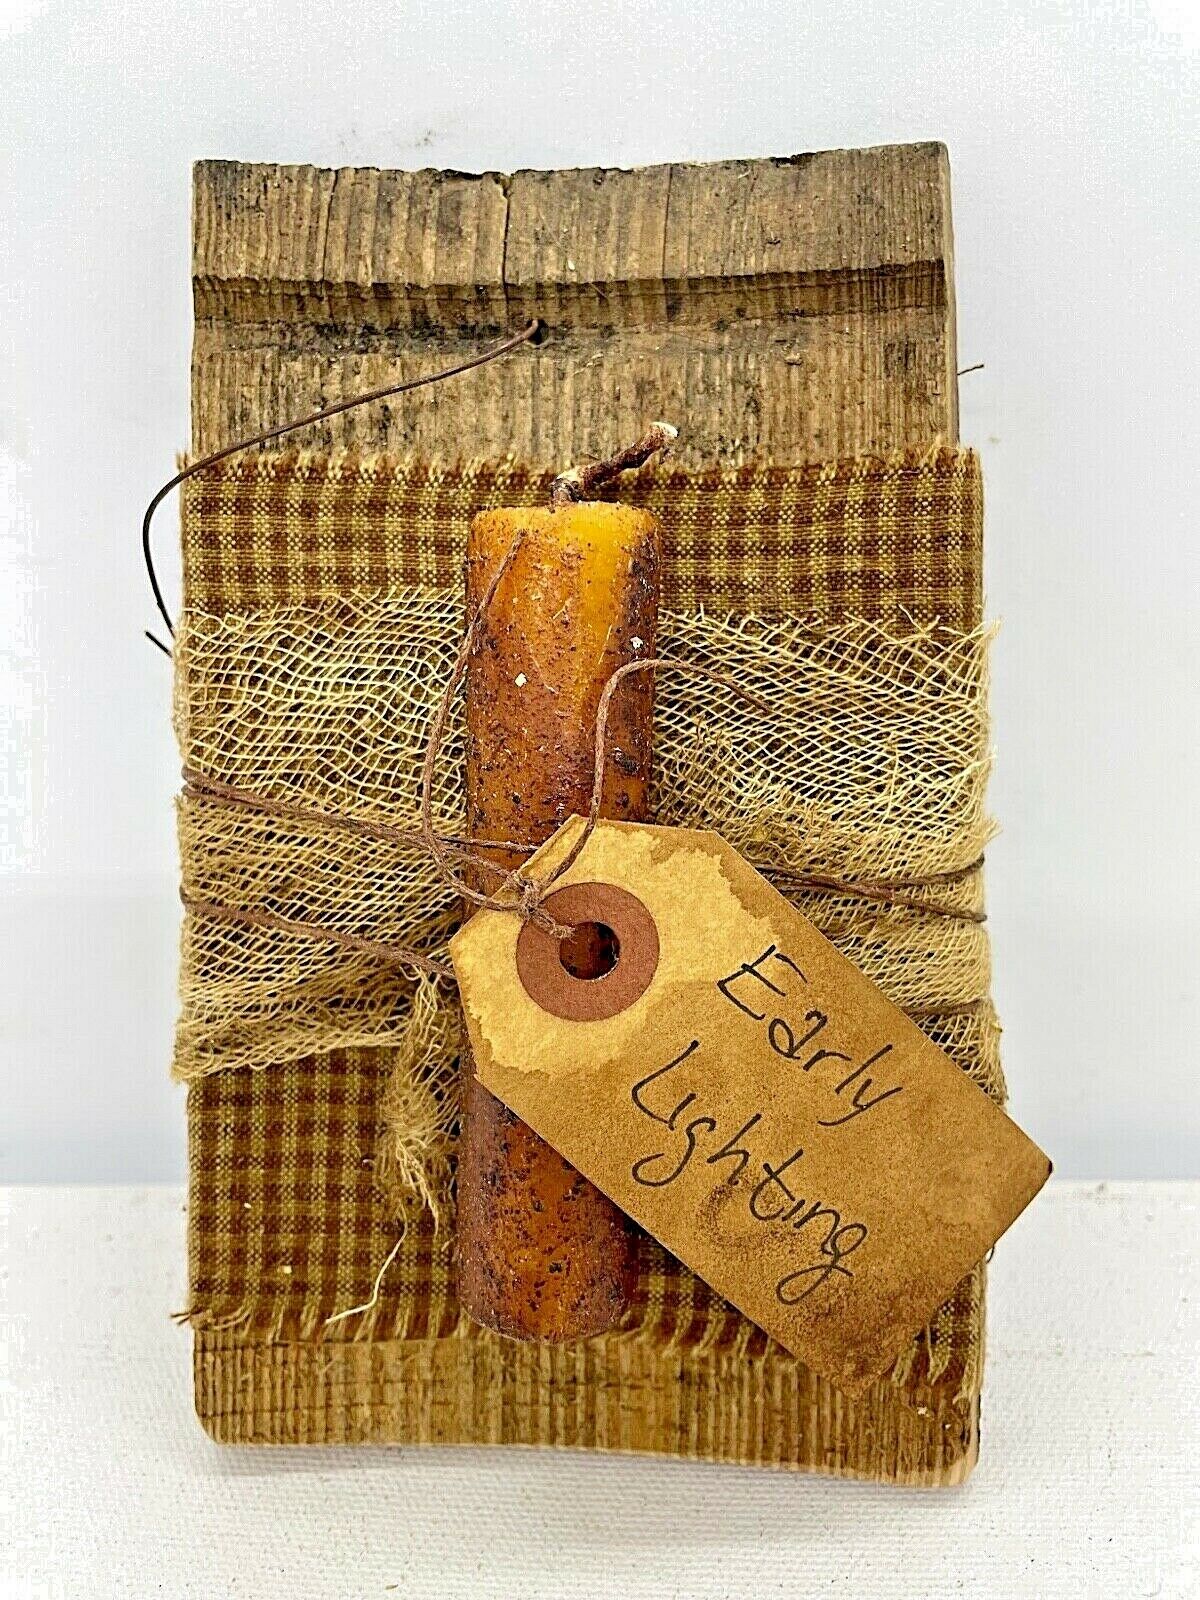 Primitive Early American Candle Hangers Blackened Beeswax /Barrel wood 6&quot; - The Primitive Pineapple Collection